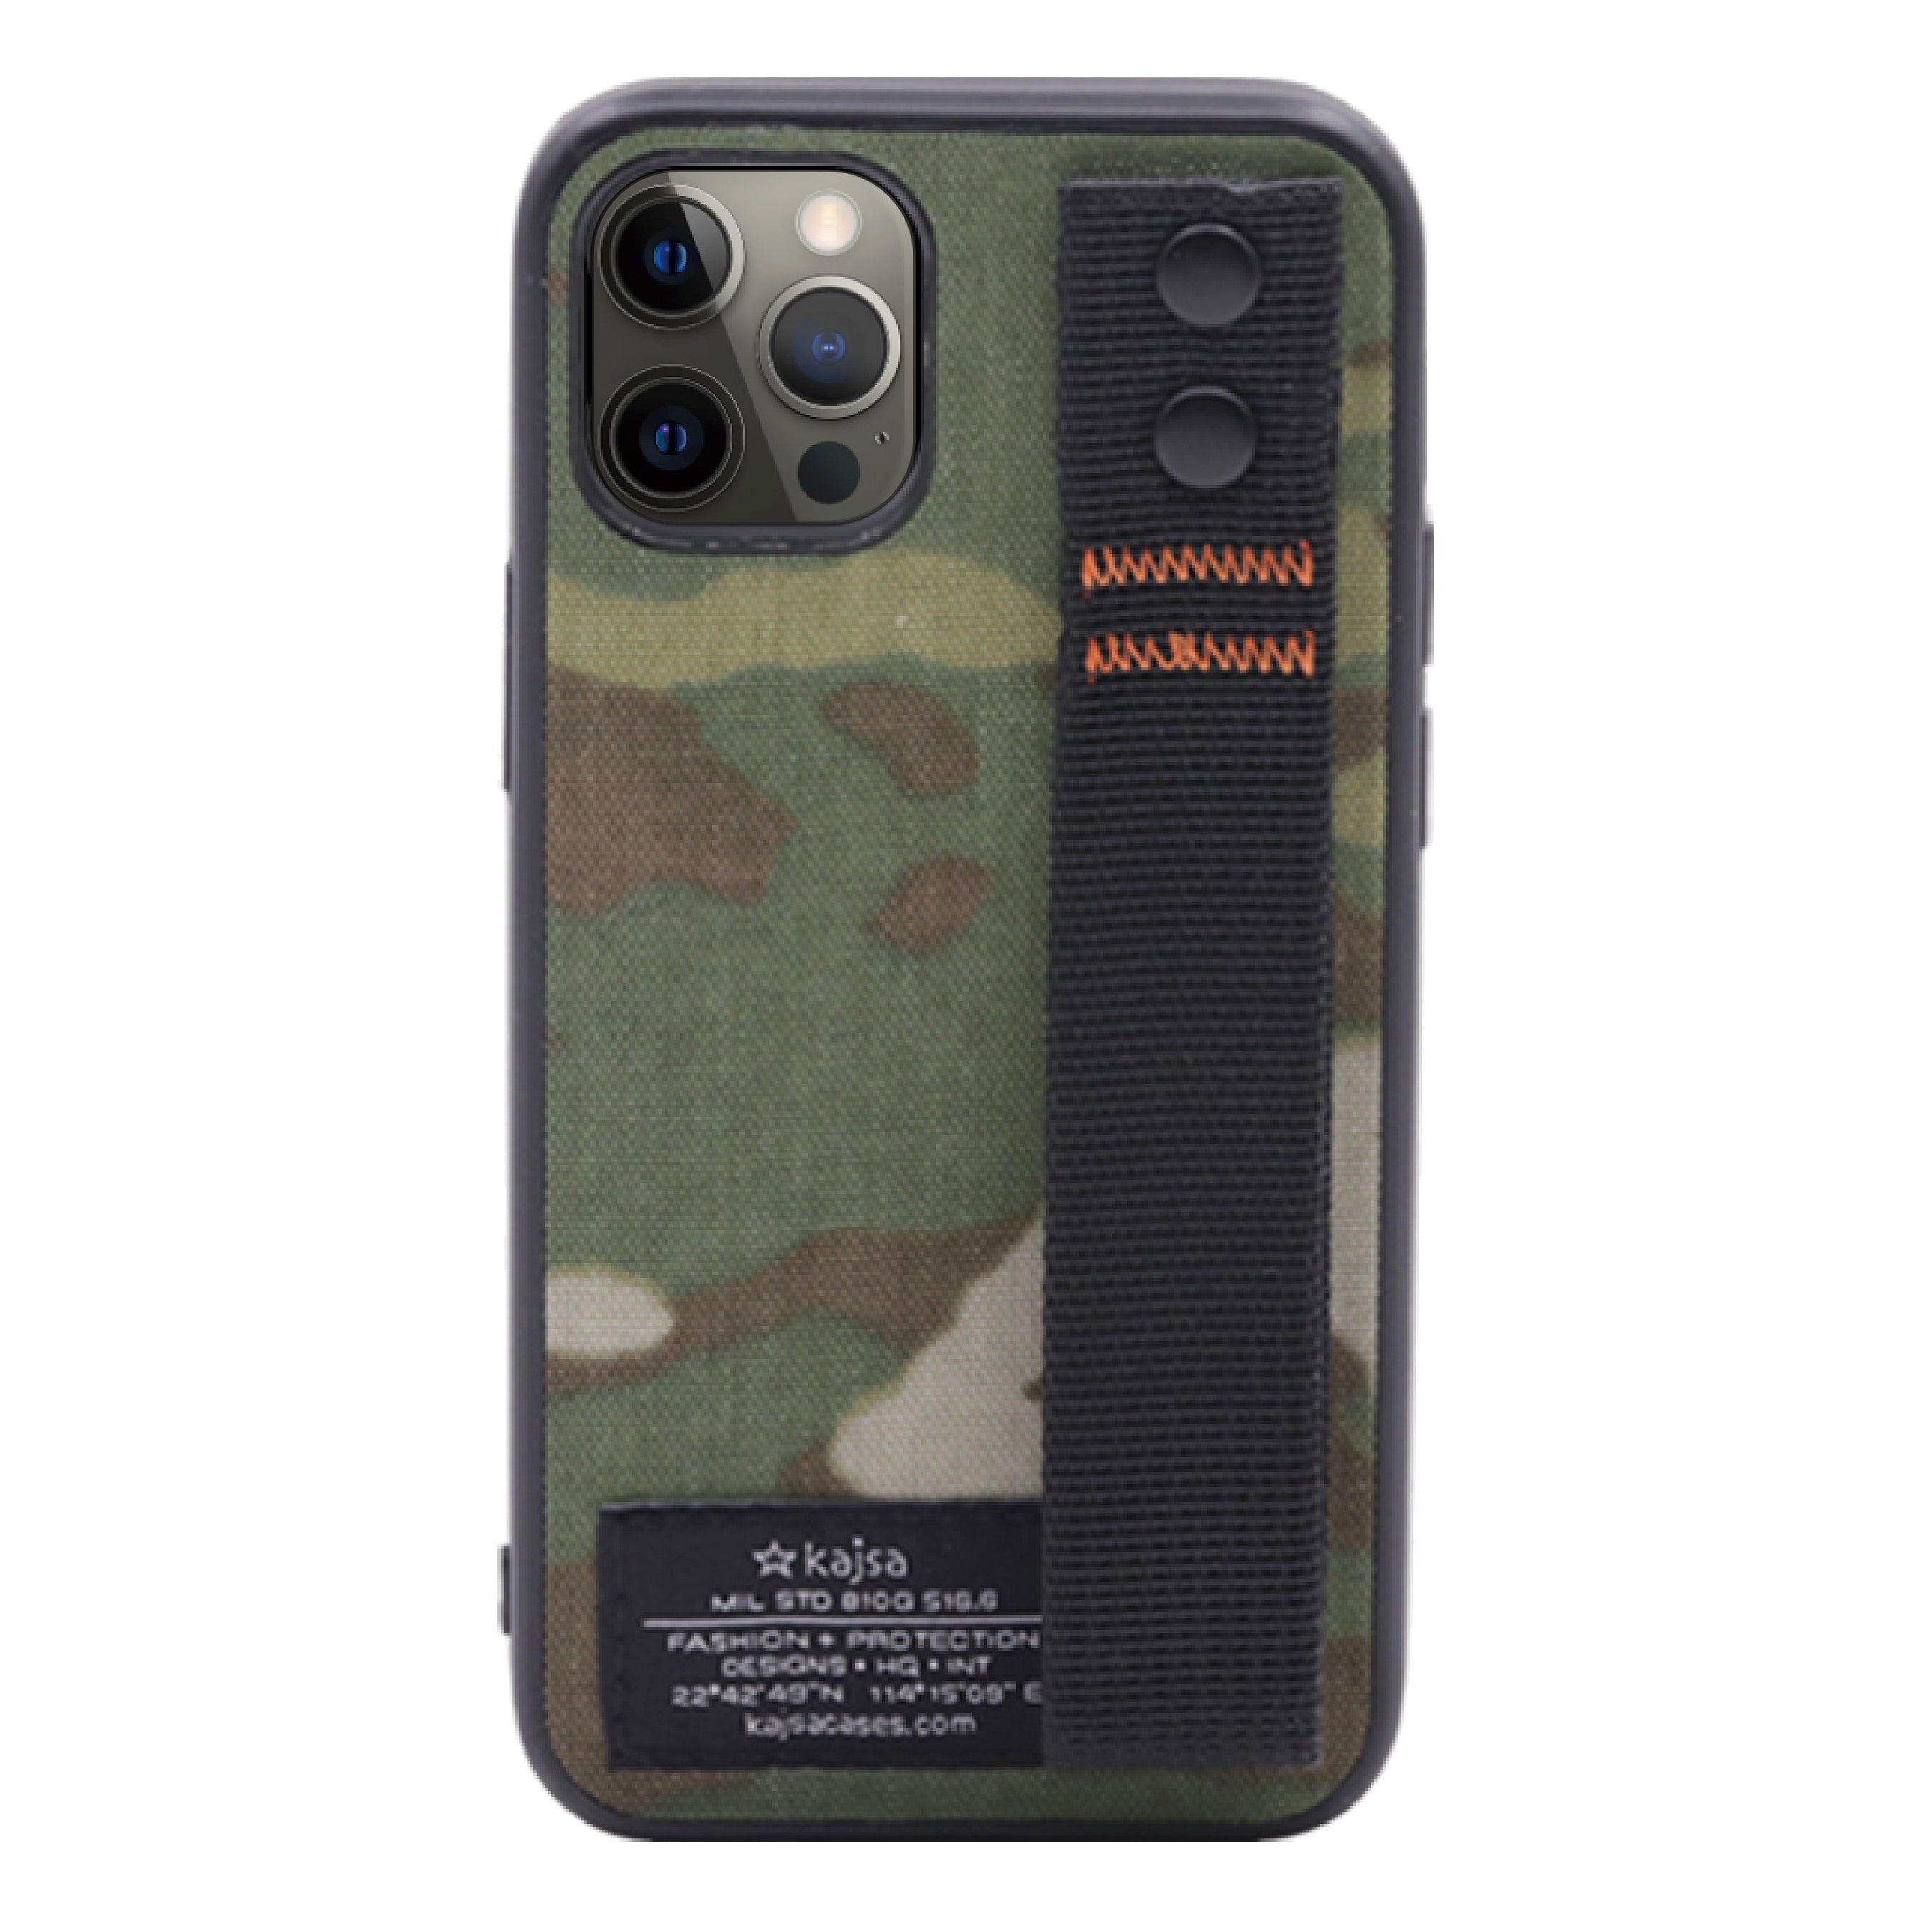 Military Collection - Straps back case for iPhone 12-Phone Case- phone case - phone cases- phone cover- iphone cover- iphone case- iphone cases- leather case- leather cases- DIYCASE - custom case - leather cover - hand strap case - croco pattern case - snake pattern case - carbon fiber phone case - phone case brand - unique phone case - high quality - phone case brand - protective case - buy phone case hong kong - online buy phone case - iphone‎手機殼 - 客製化手機殼 - samsung ‎手機殼 - 香港手機殼 - 買電話殼